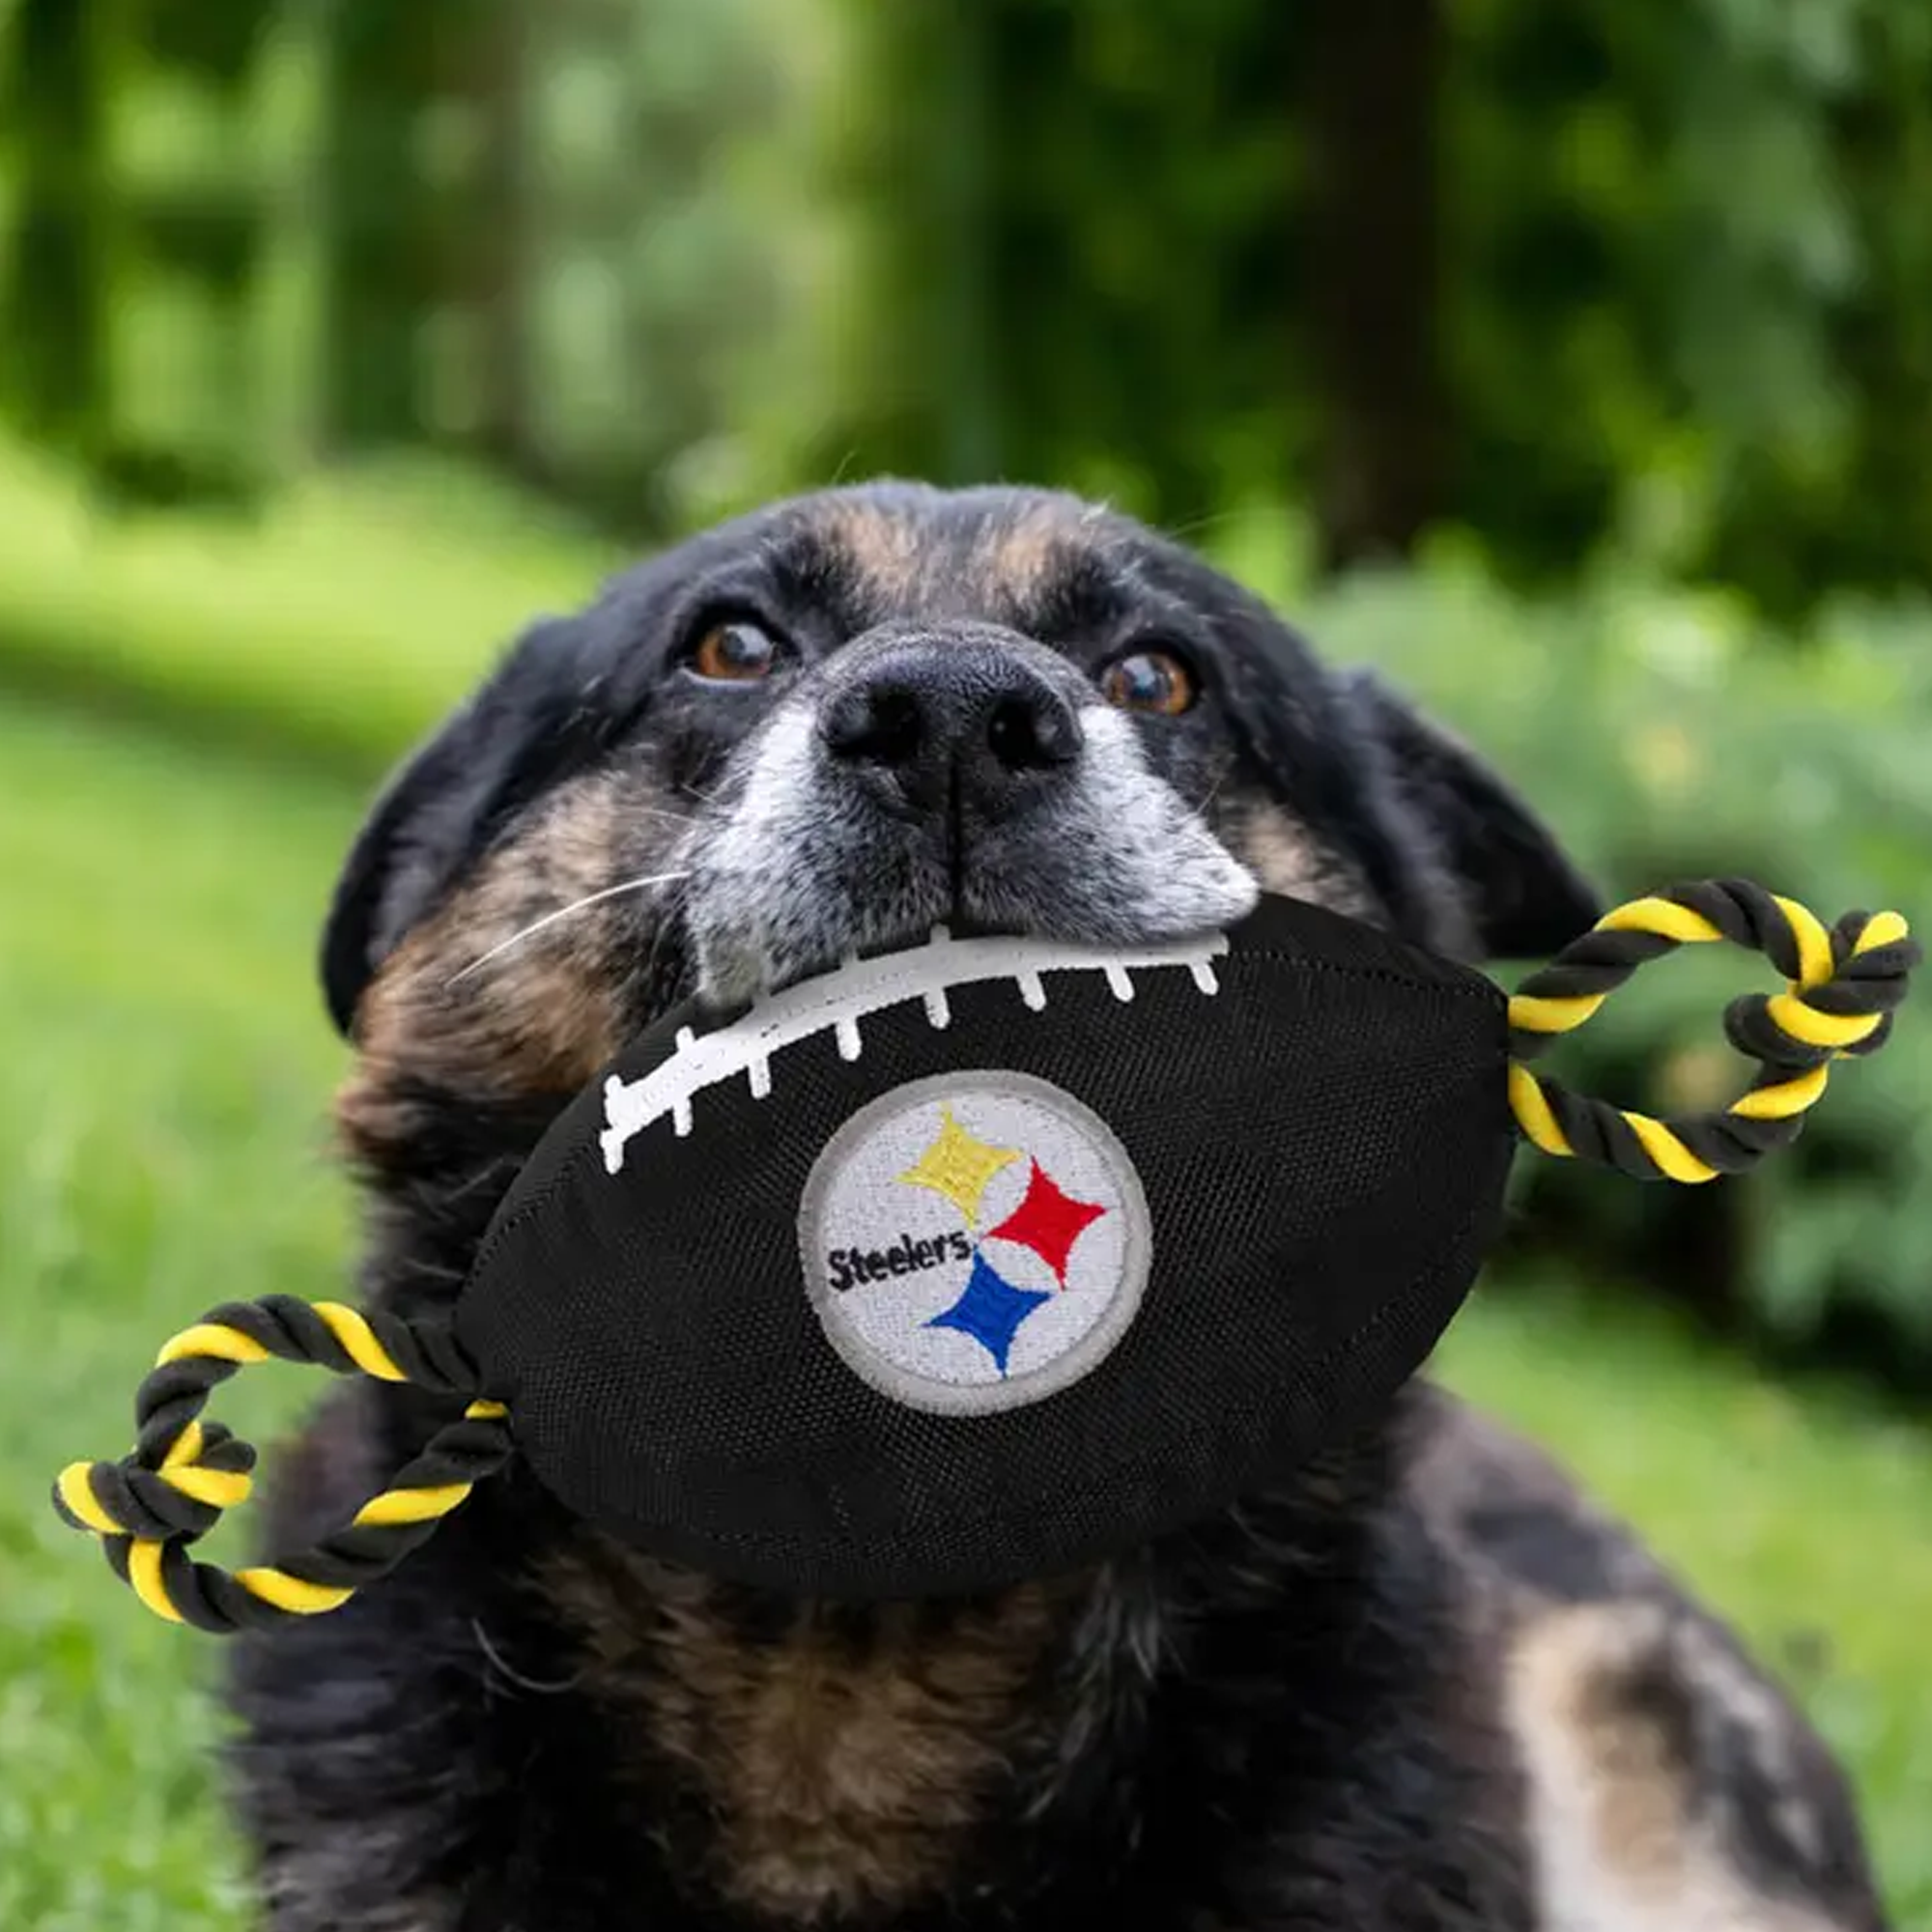 steelers dog accessories